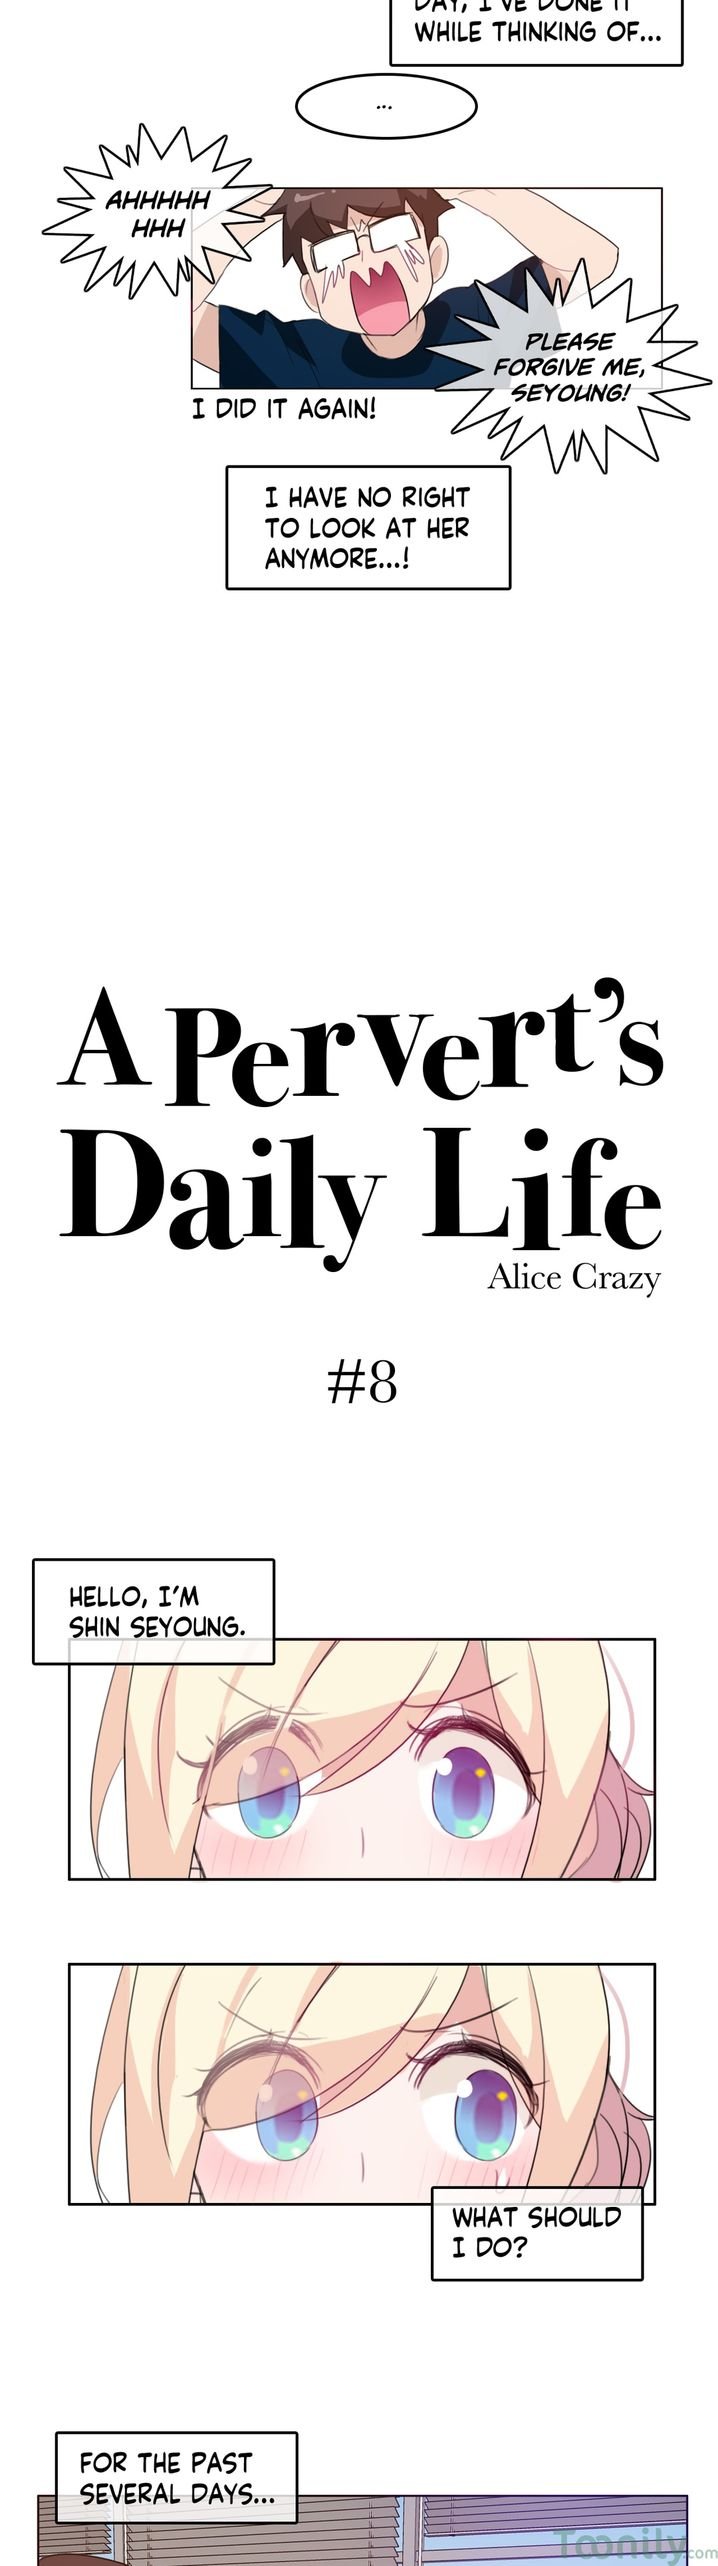 a-perverts-daily-life-chap-8-4